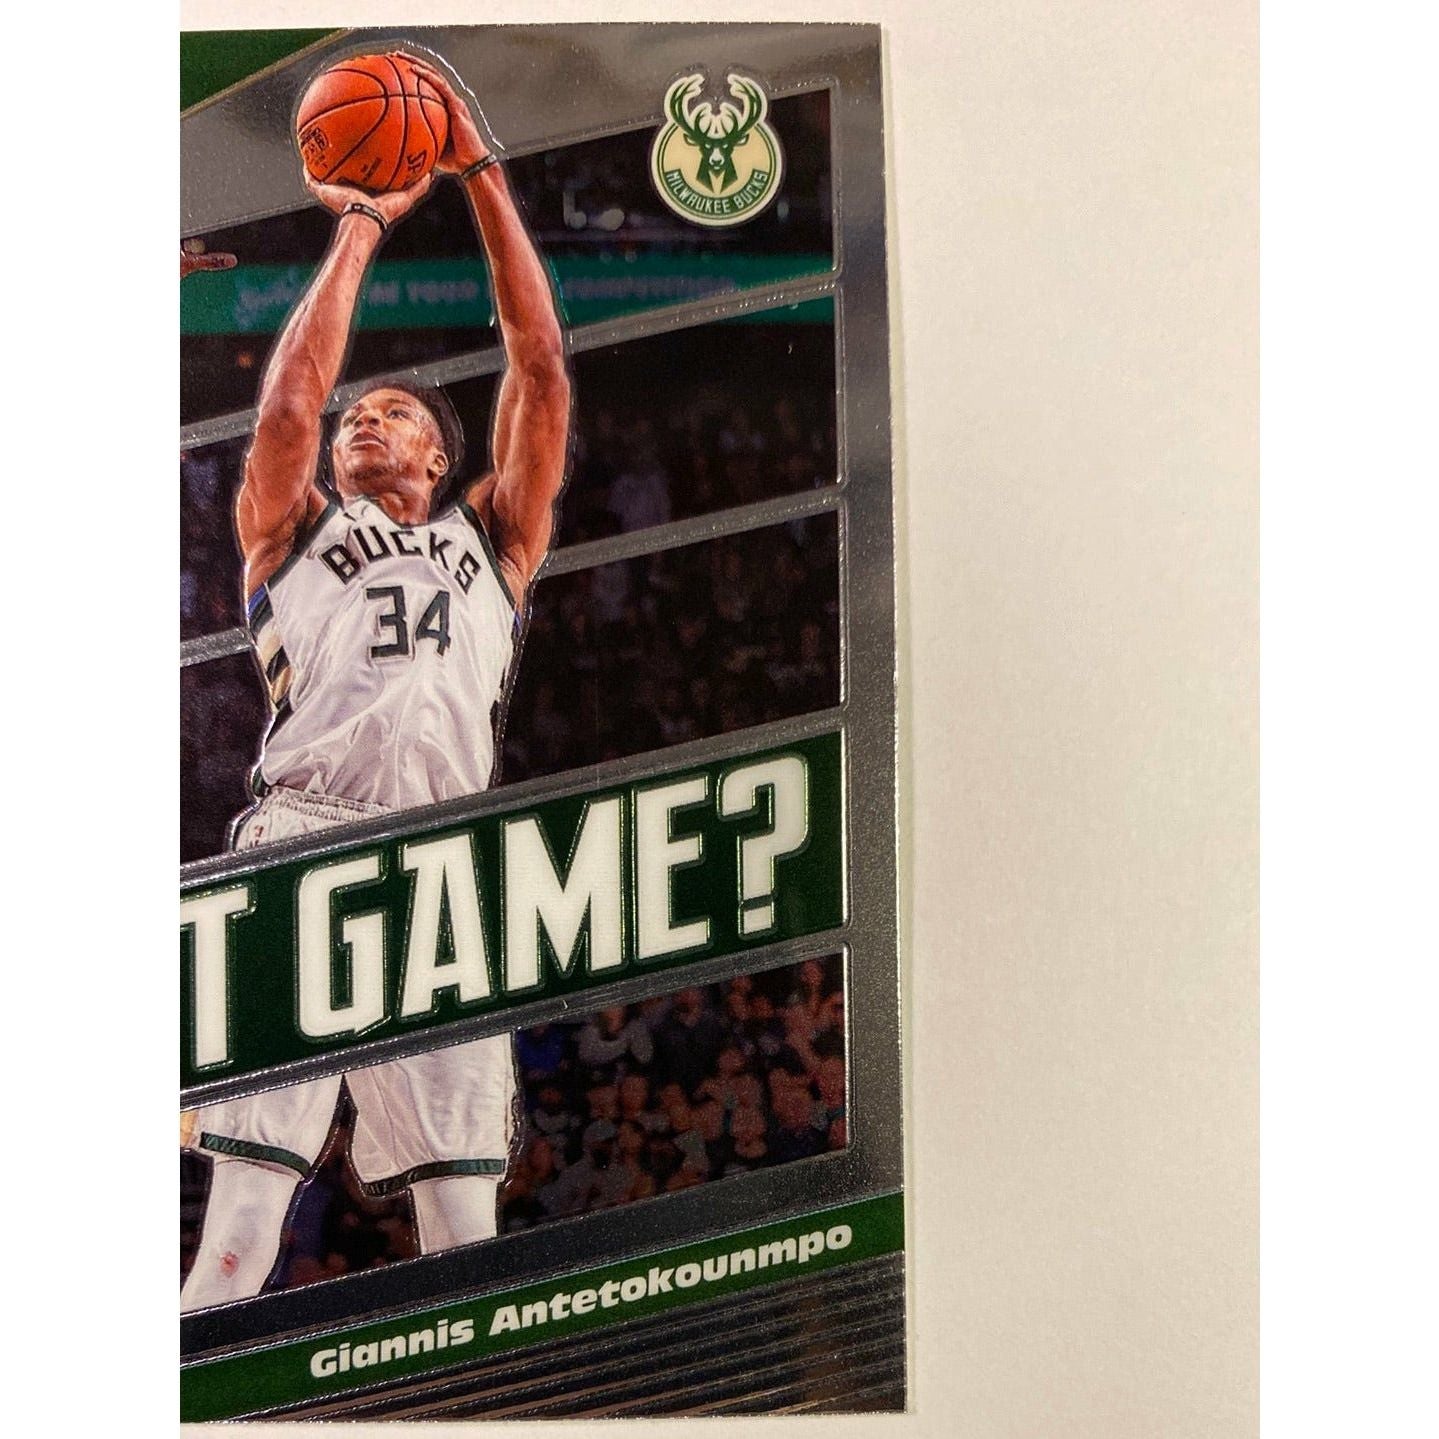  2019-20 Mosaic Giannis Antetokounmpo Got Game?  Local Legends Cards & Collectibles